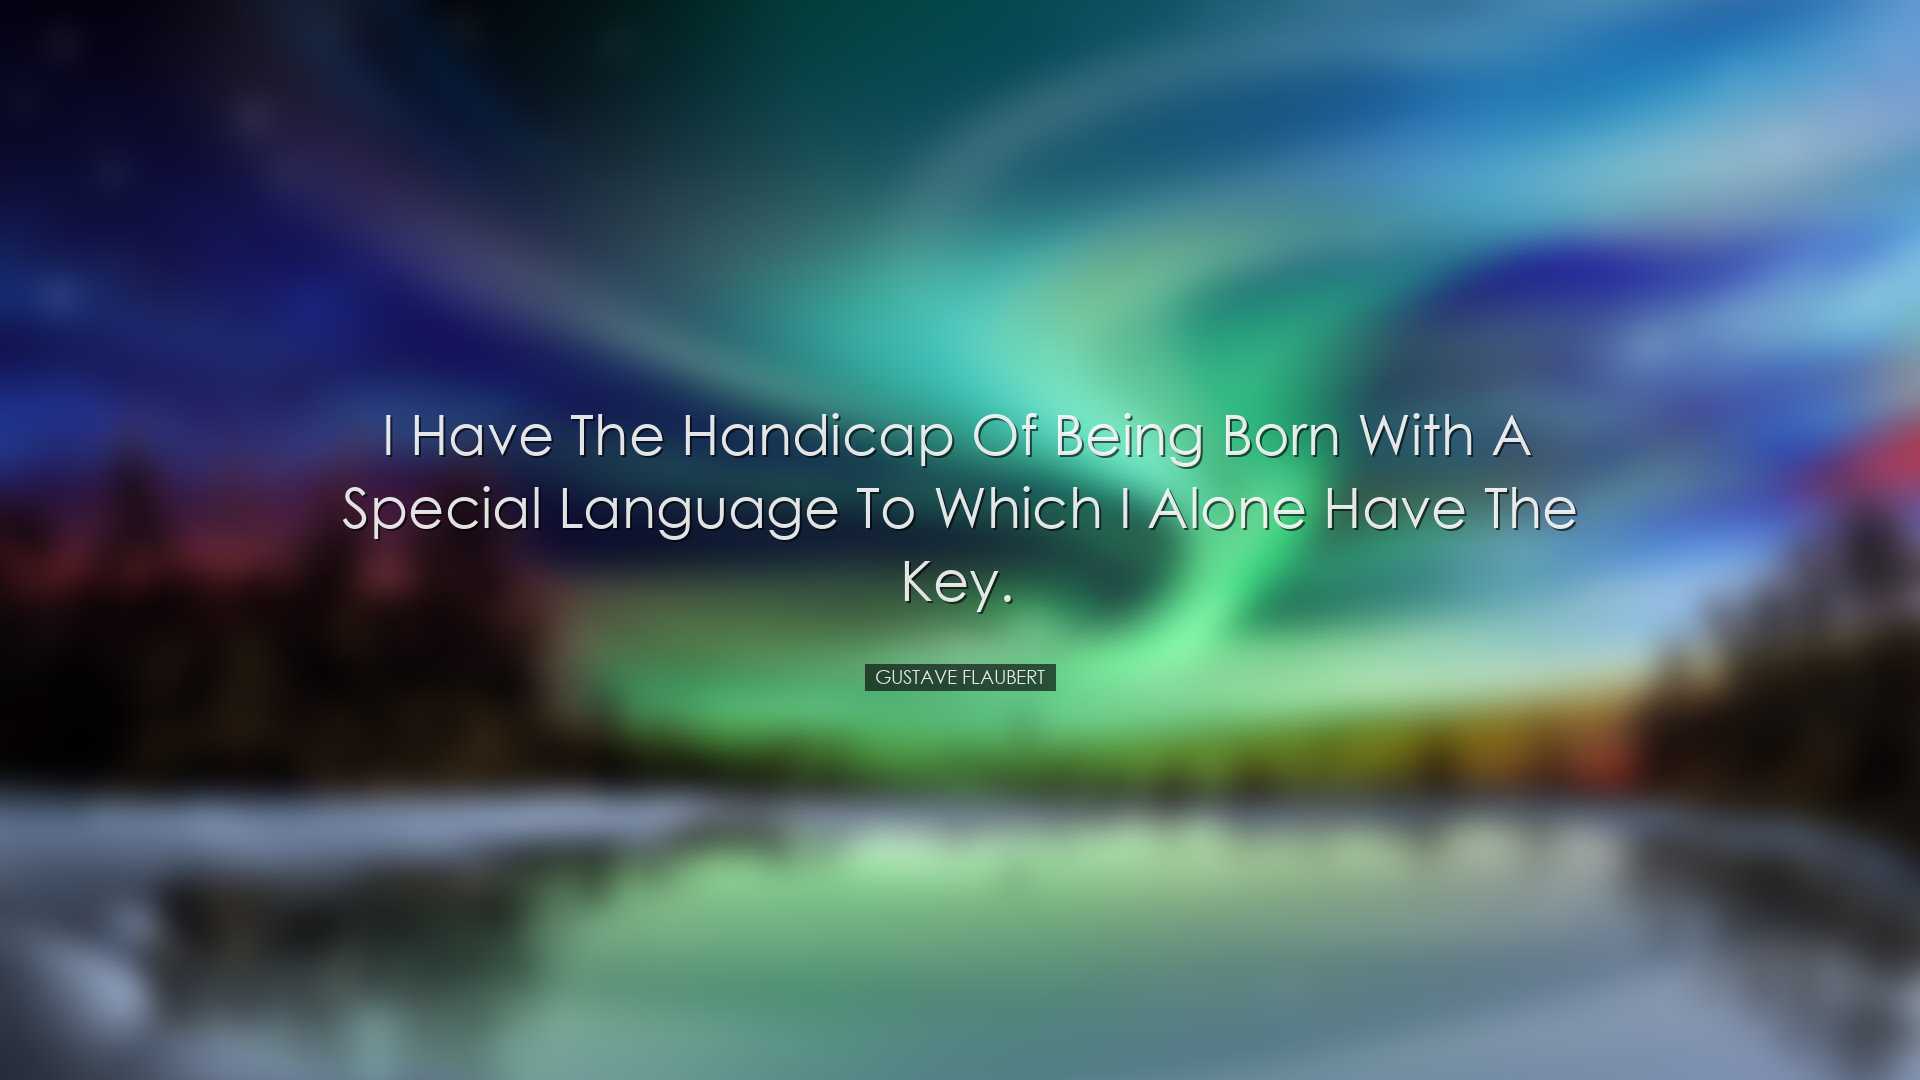 I have the handicap of being born with a special language to which